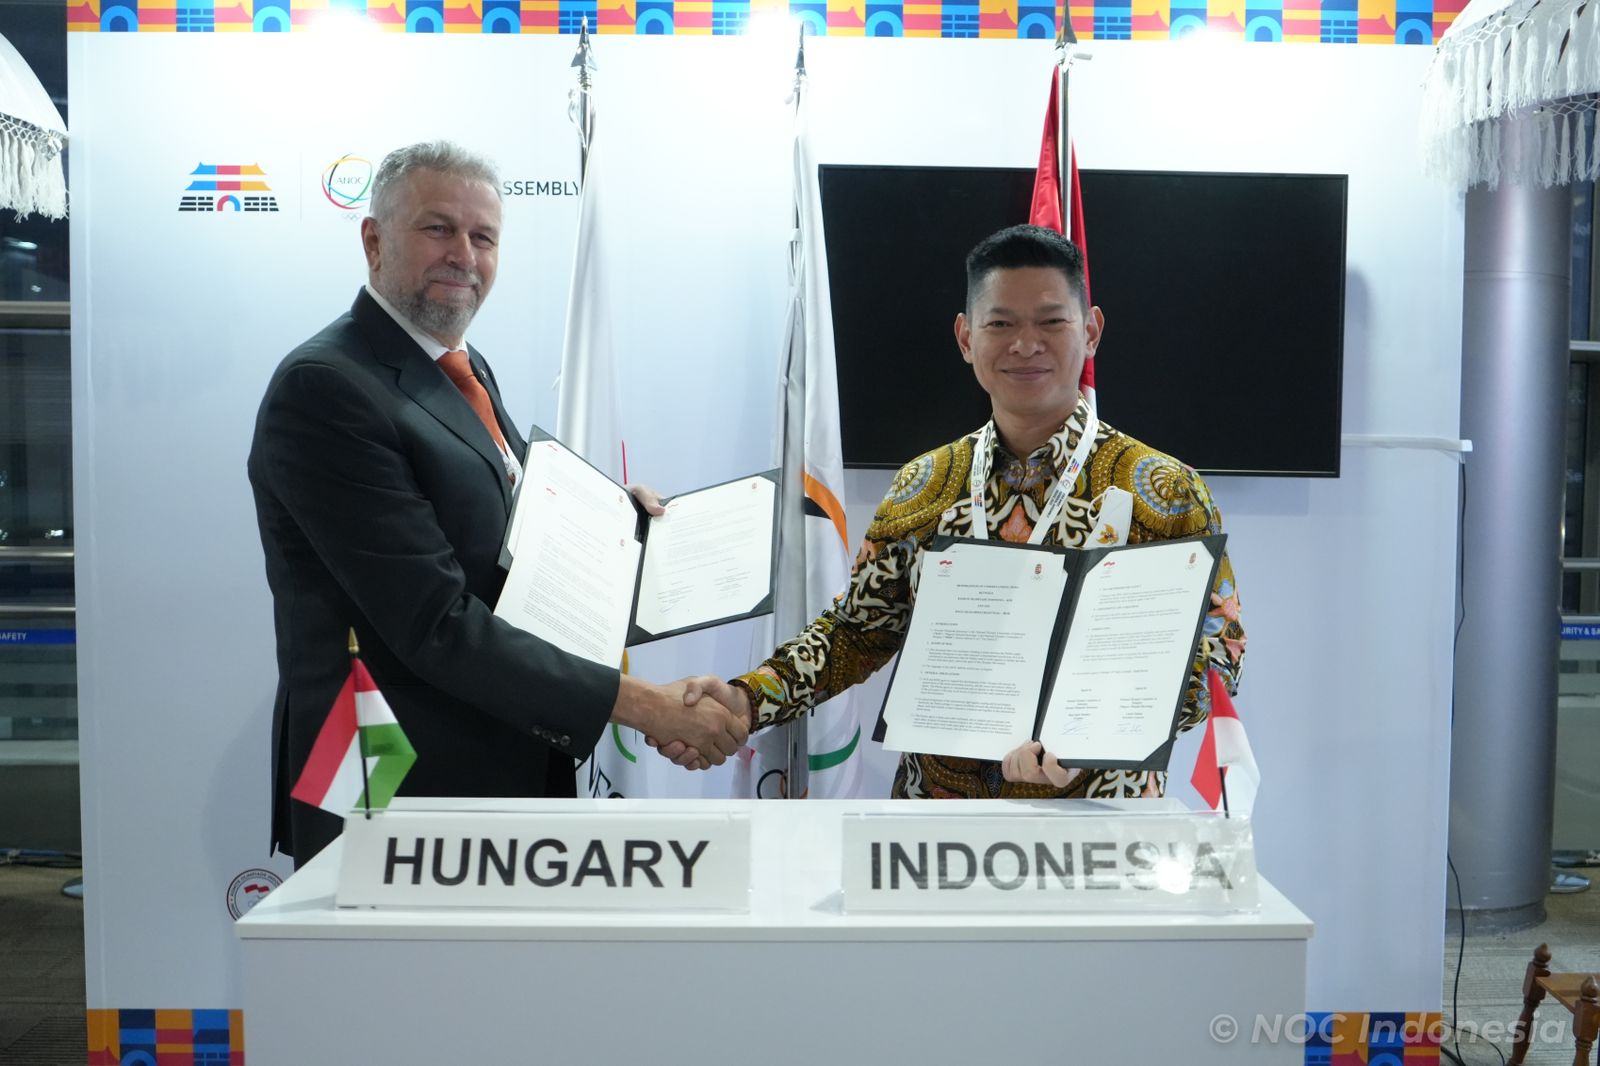 Partnership with NOC Hungary formalized as NOC Indonesia aim to increase Global Sports - Indonesia Olympic Commitee